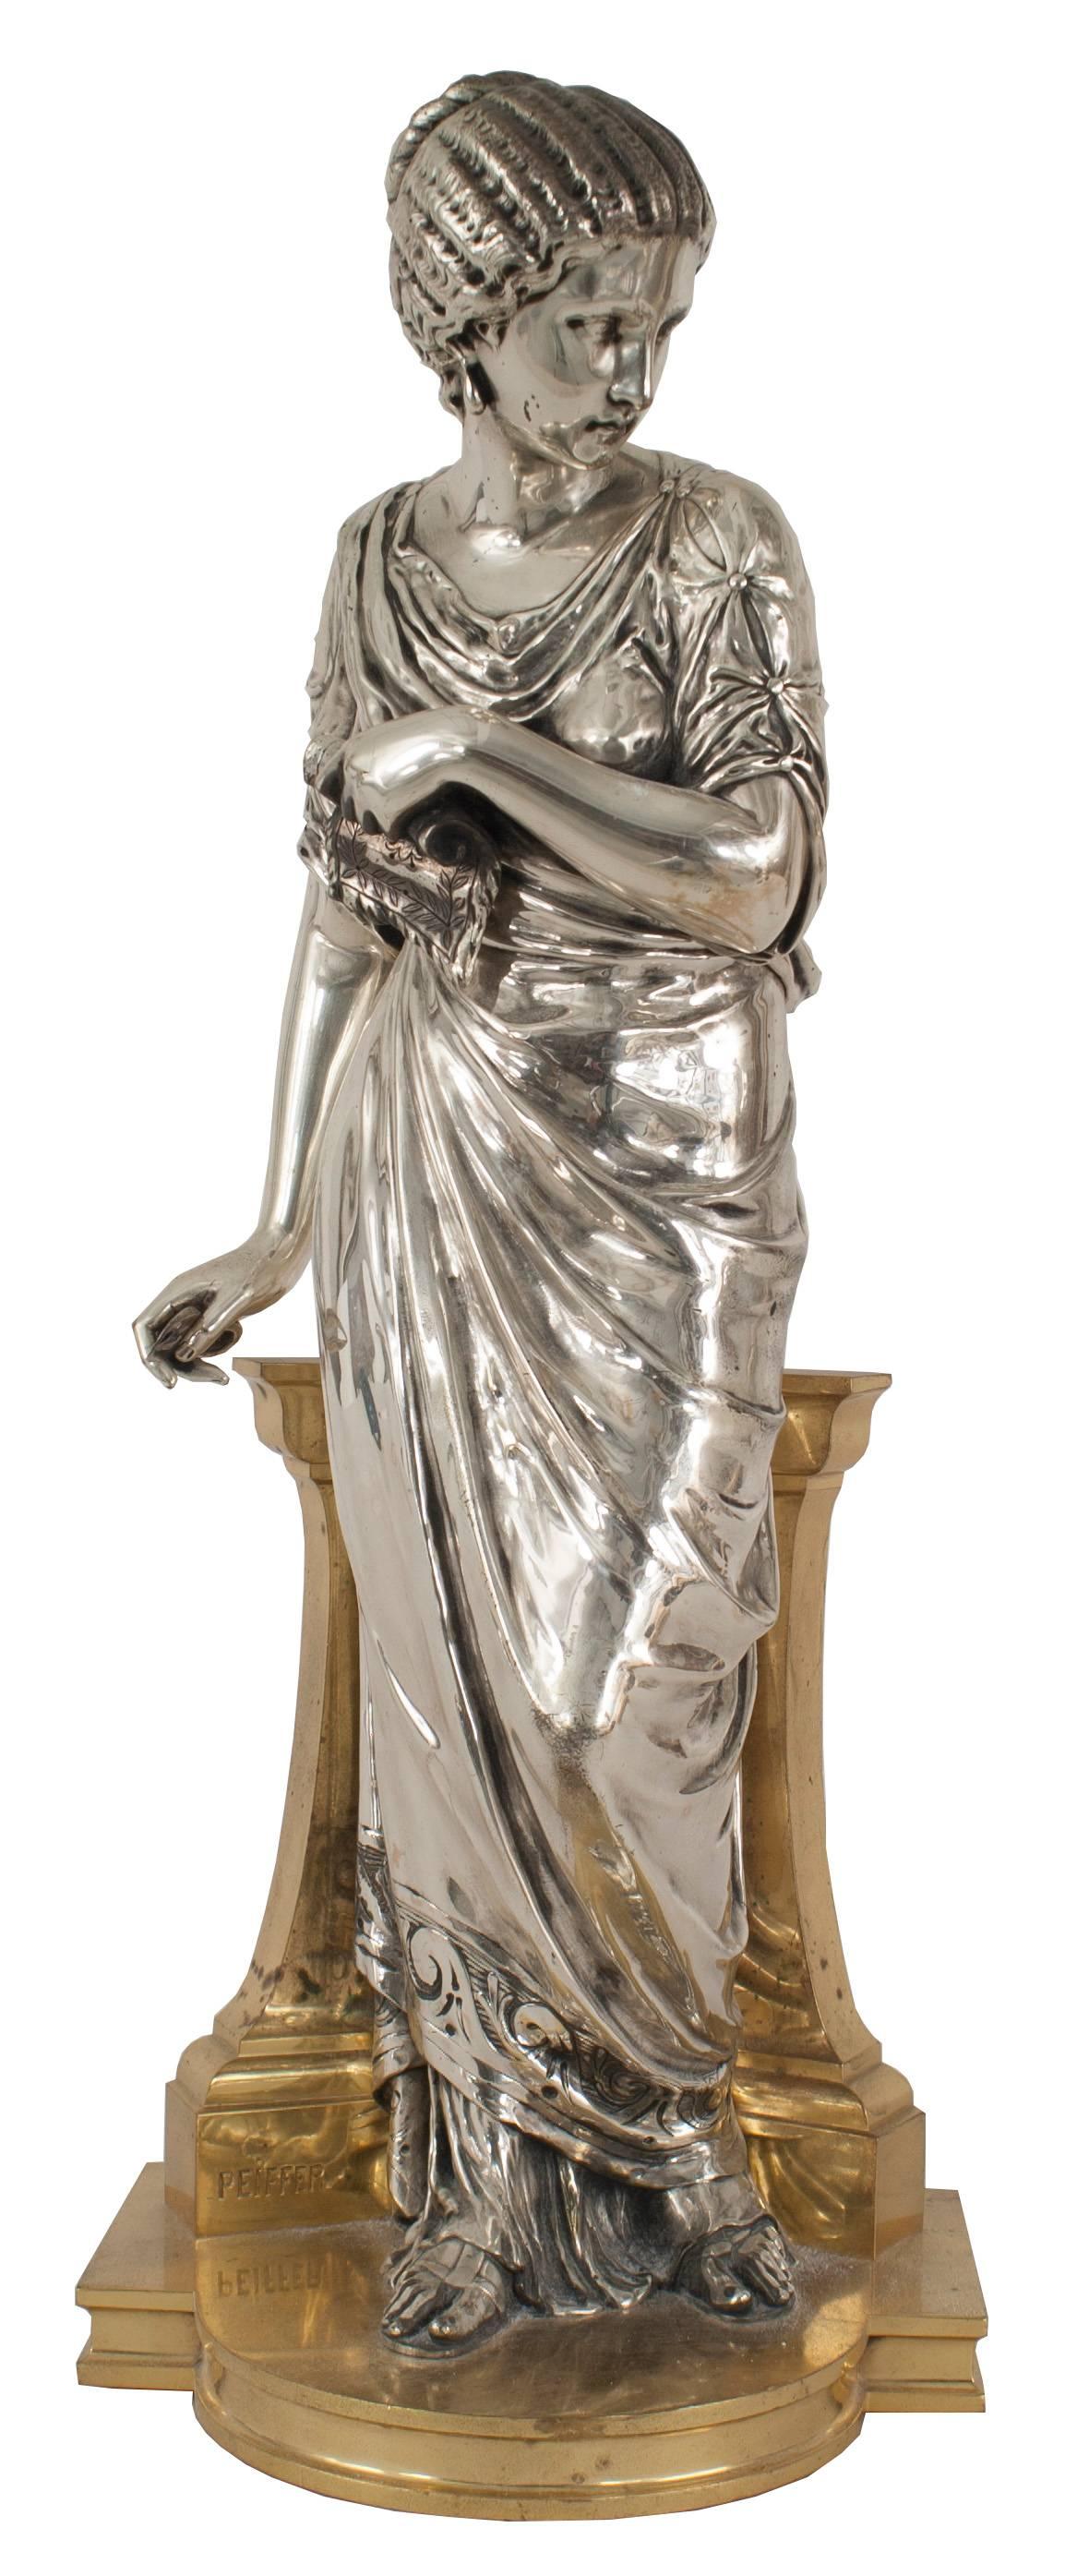 Pair of French Victorian silvered and gilt bronze classical Greek female figures after models by Joseph Peiffer (retailed and stamped TIFFANY & CO./NEW YORK).
   